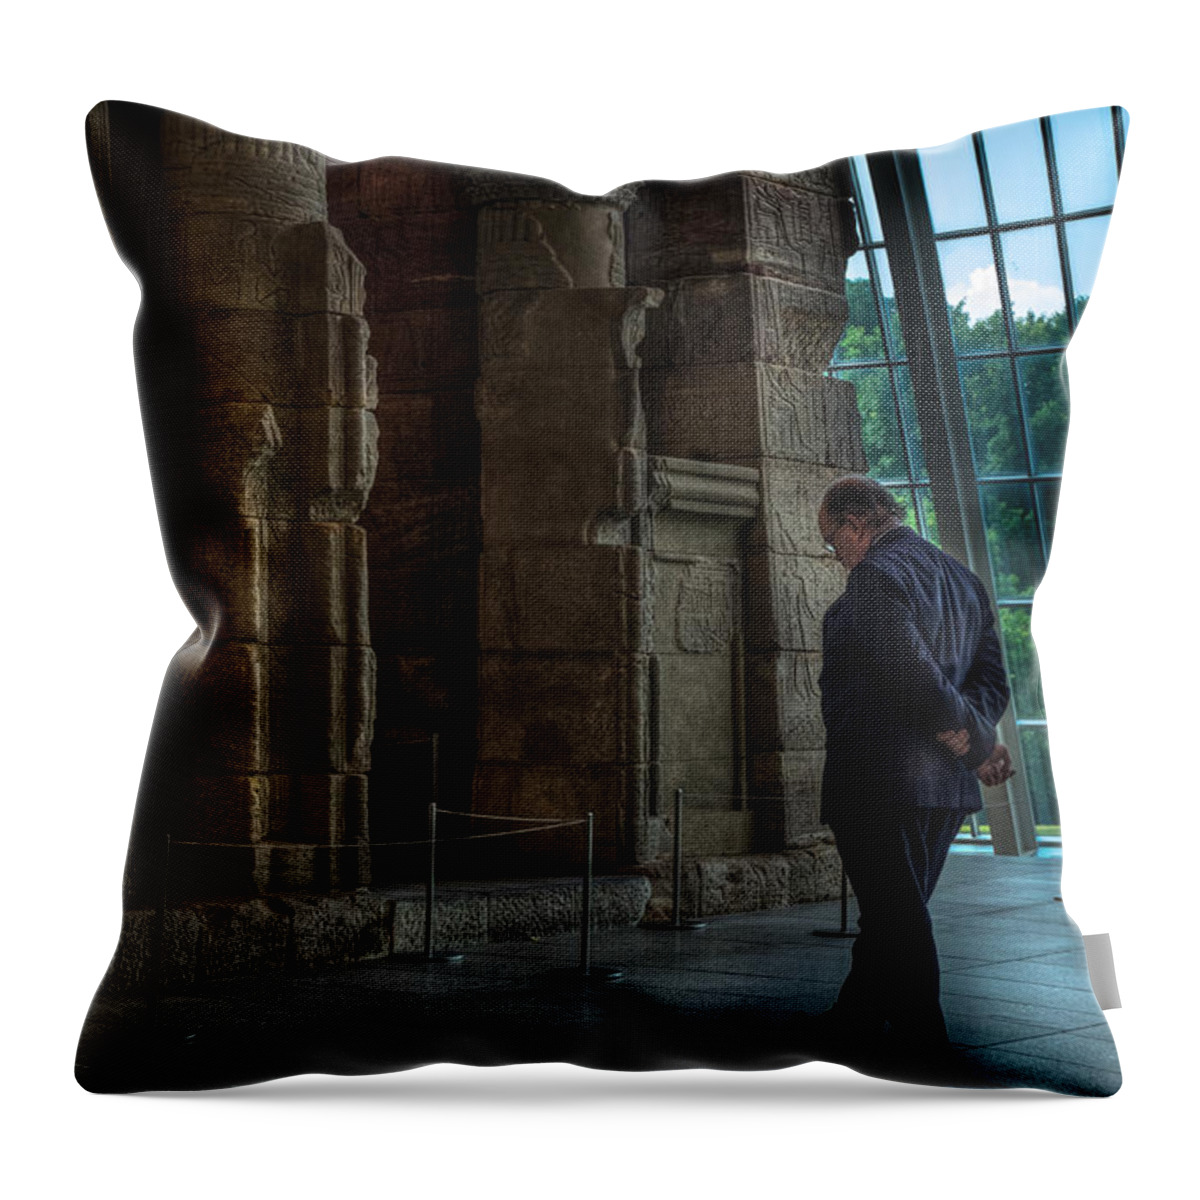 At Worship Before The Temple Throw Pillow featuring the digital art At Worship Before the Temple by William Fields